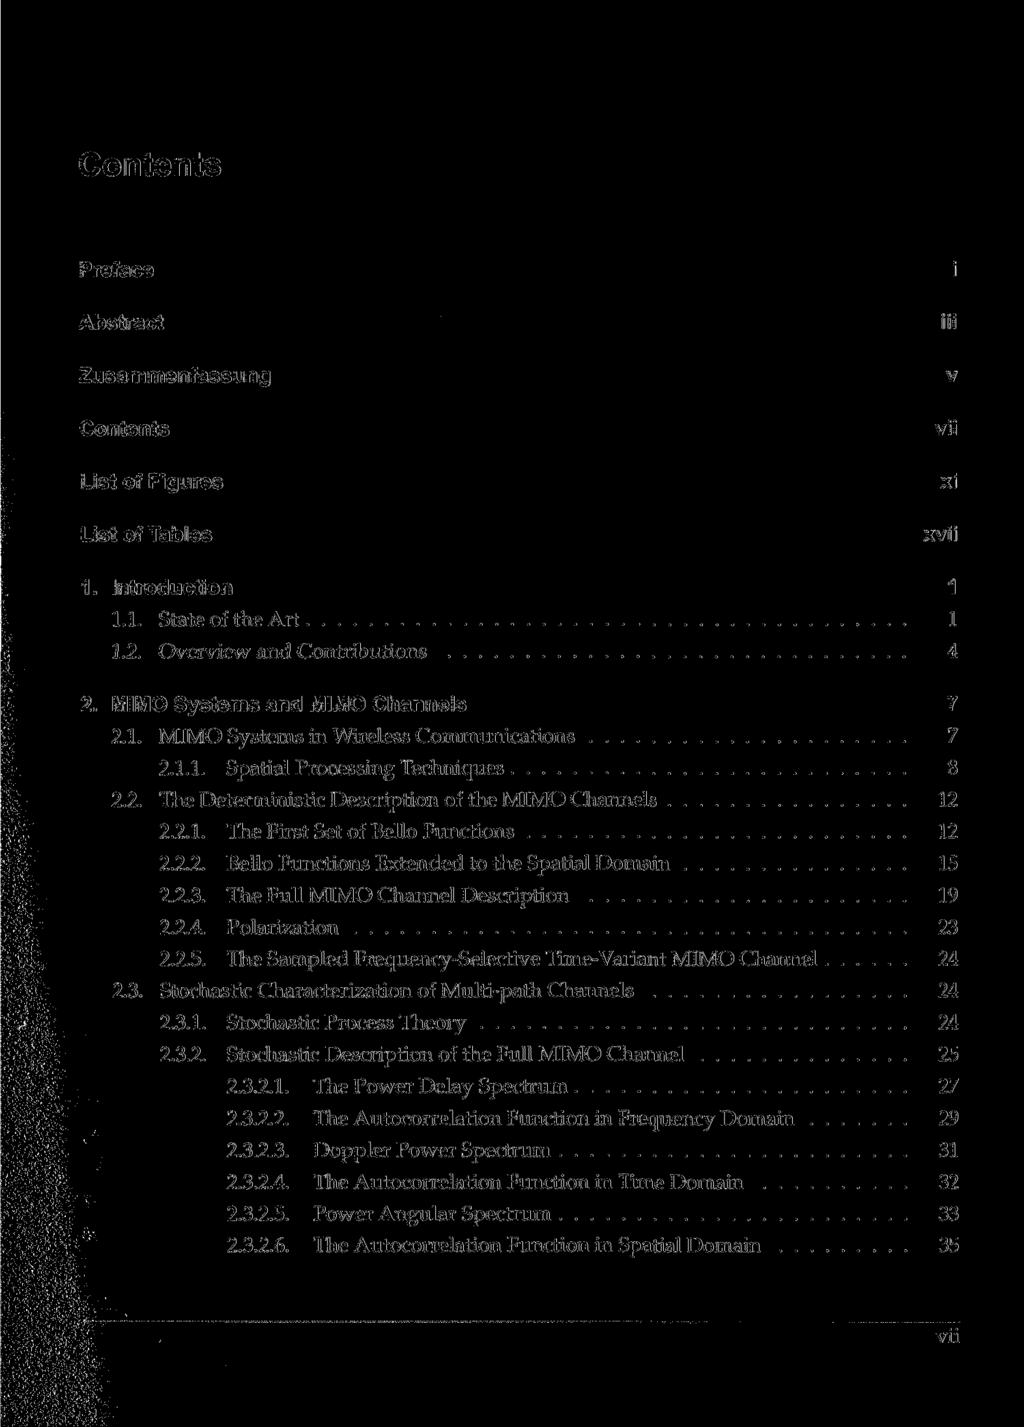 Contents Preface Abstract Zusammenfassung Contents List of Figures List of Tables i Hi v vii xi xvii 1. Introduction 1 1.1. State of the Art 1 1.2. Overview and Contributions 4 2.